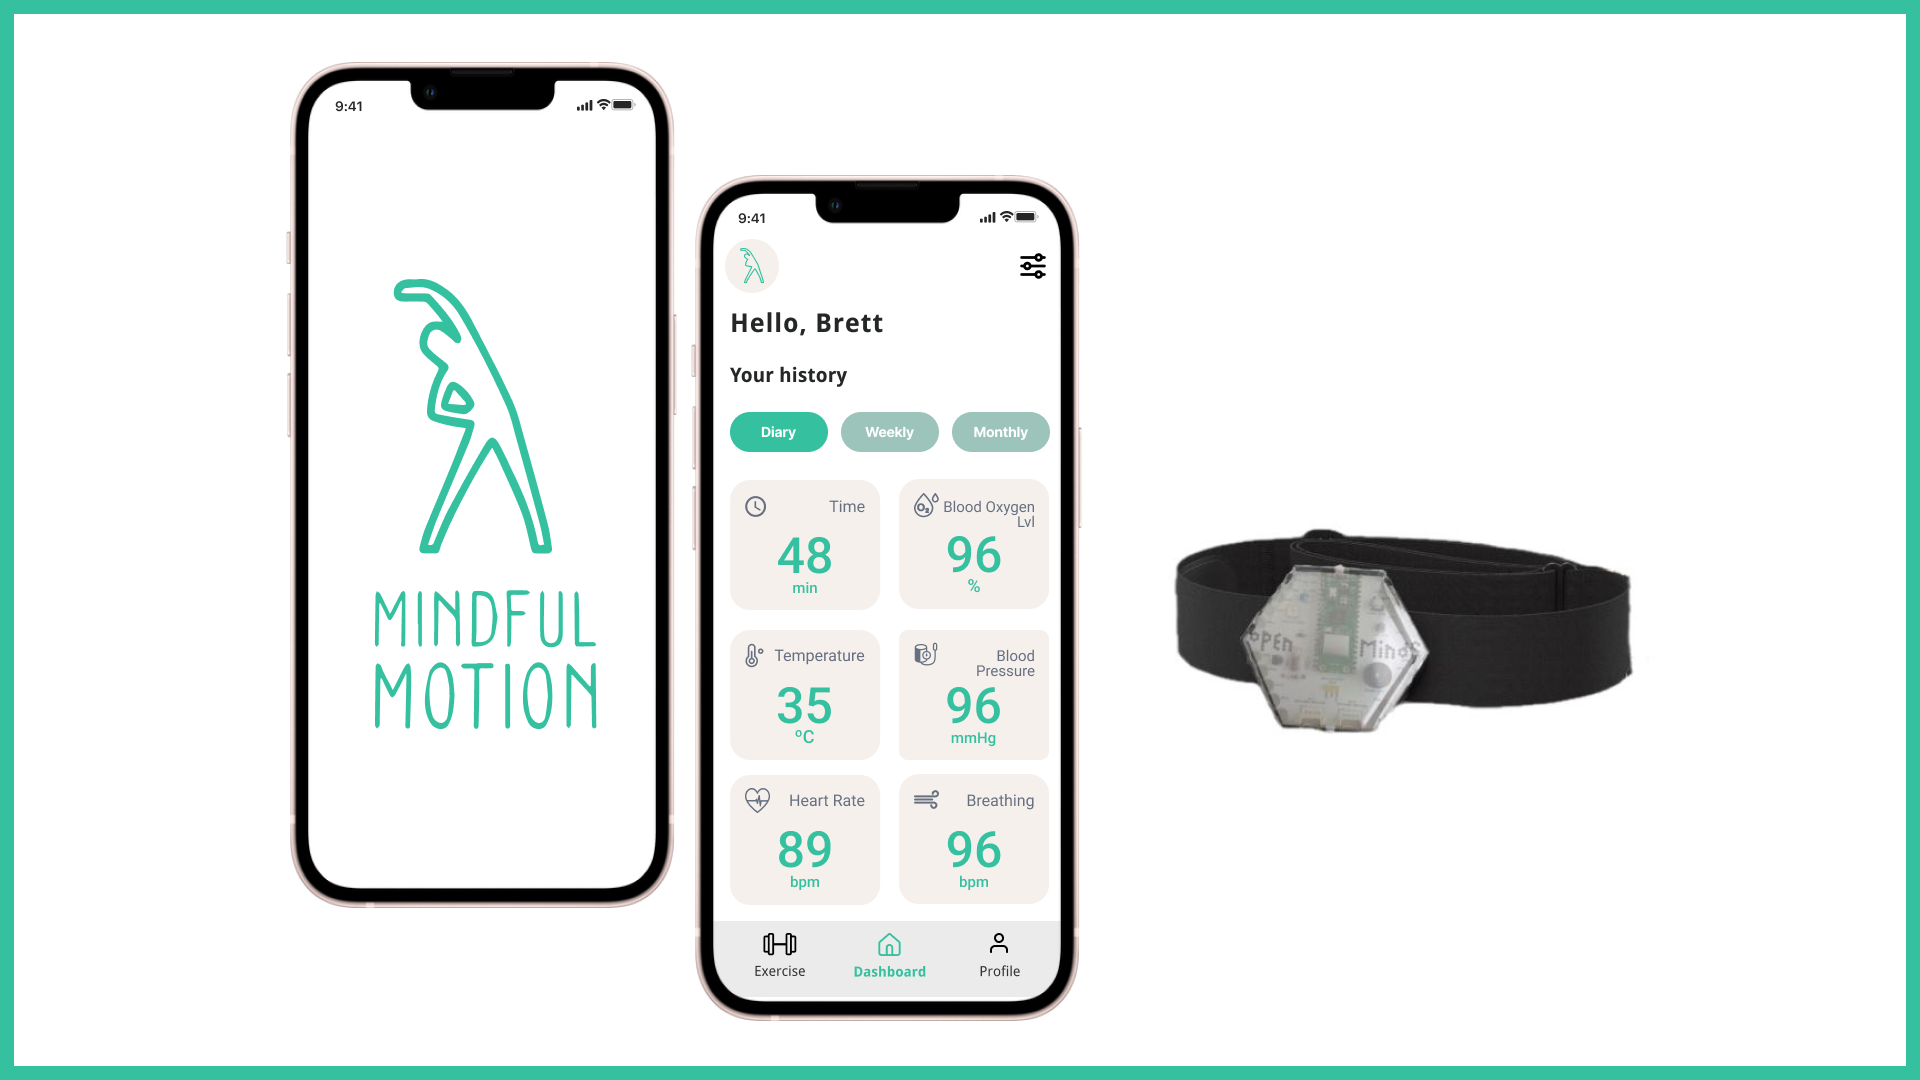 MindfulMotion – empowering exercise routines